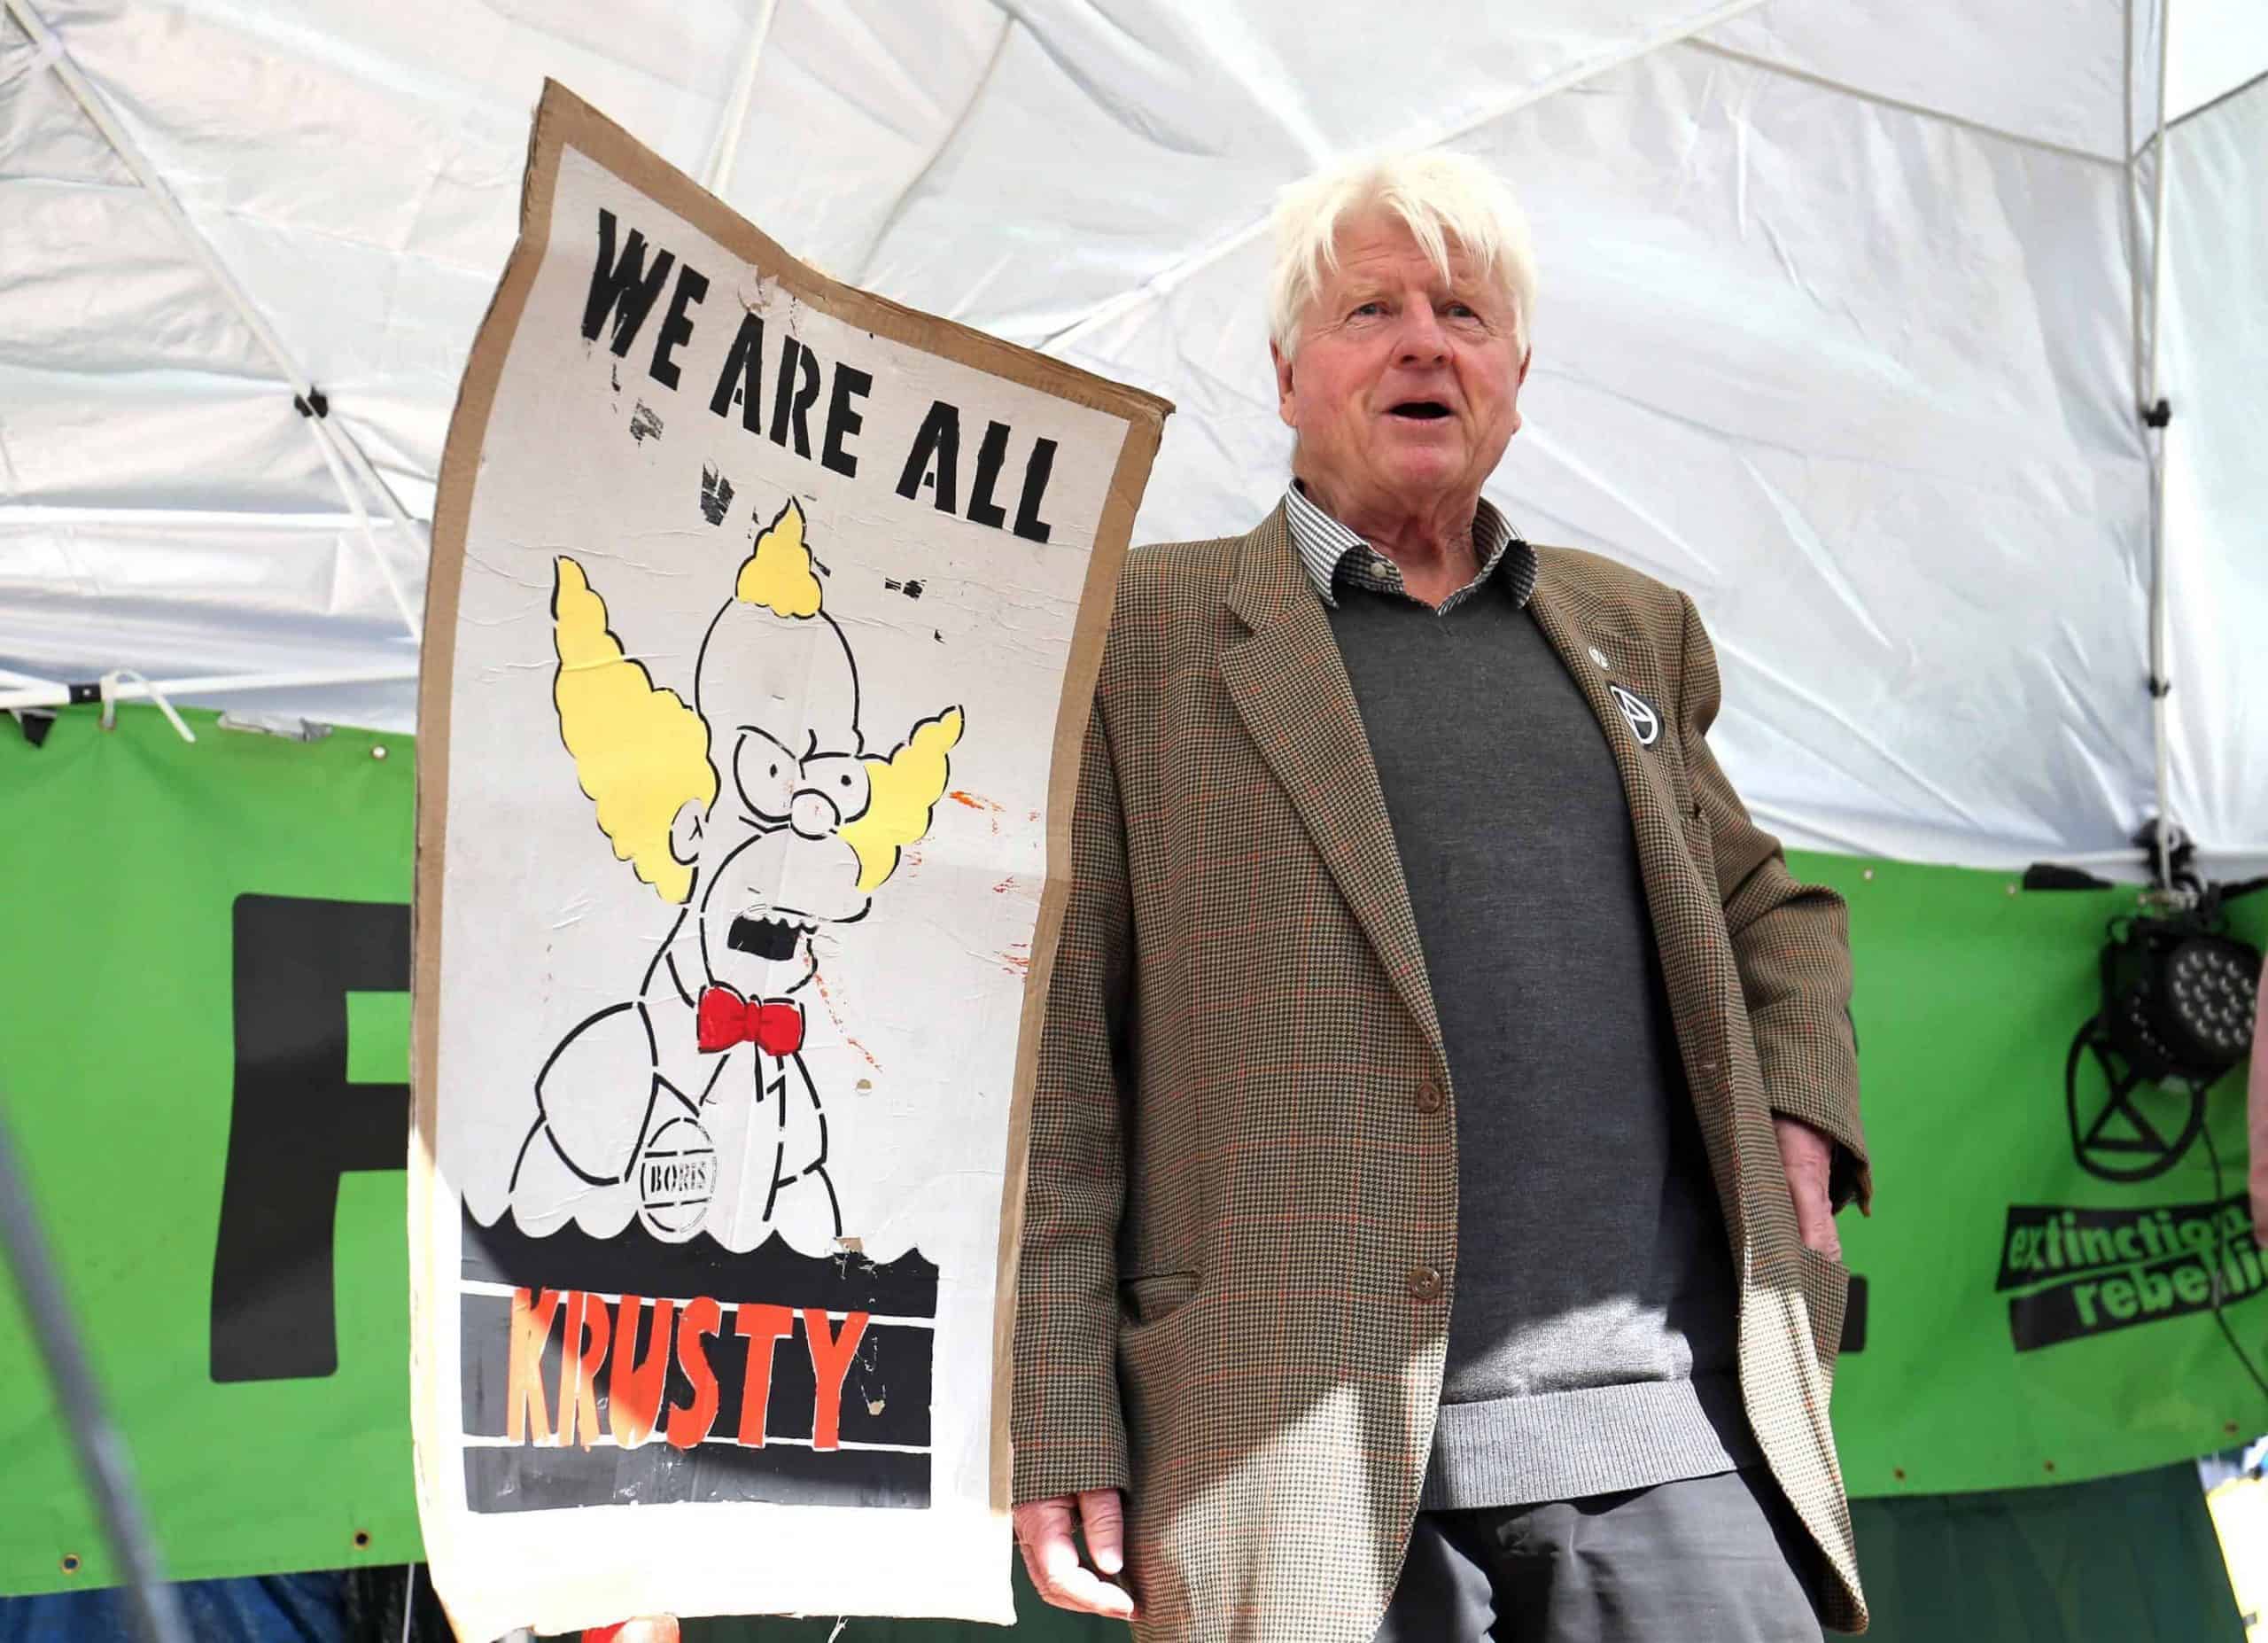 Calling me a ‘crusty’ is a compliment says Boris Johnson’s dad at climate demo